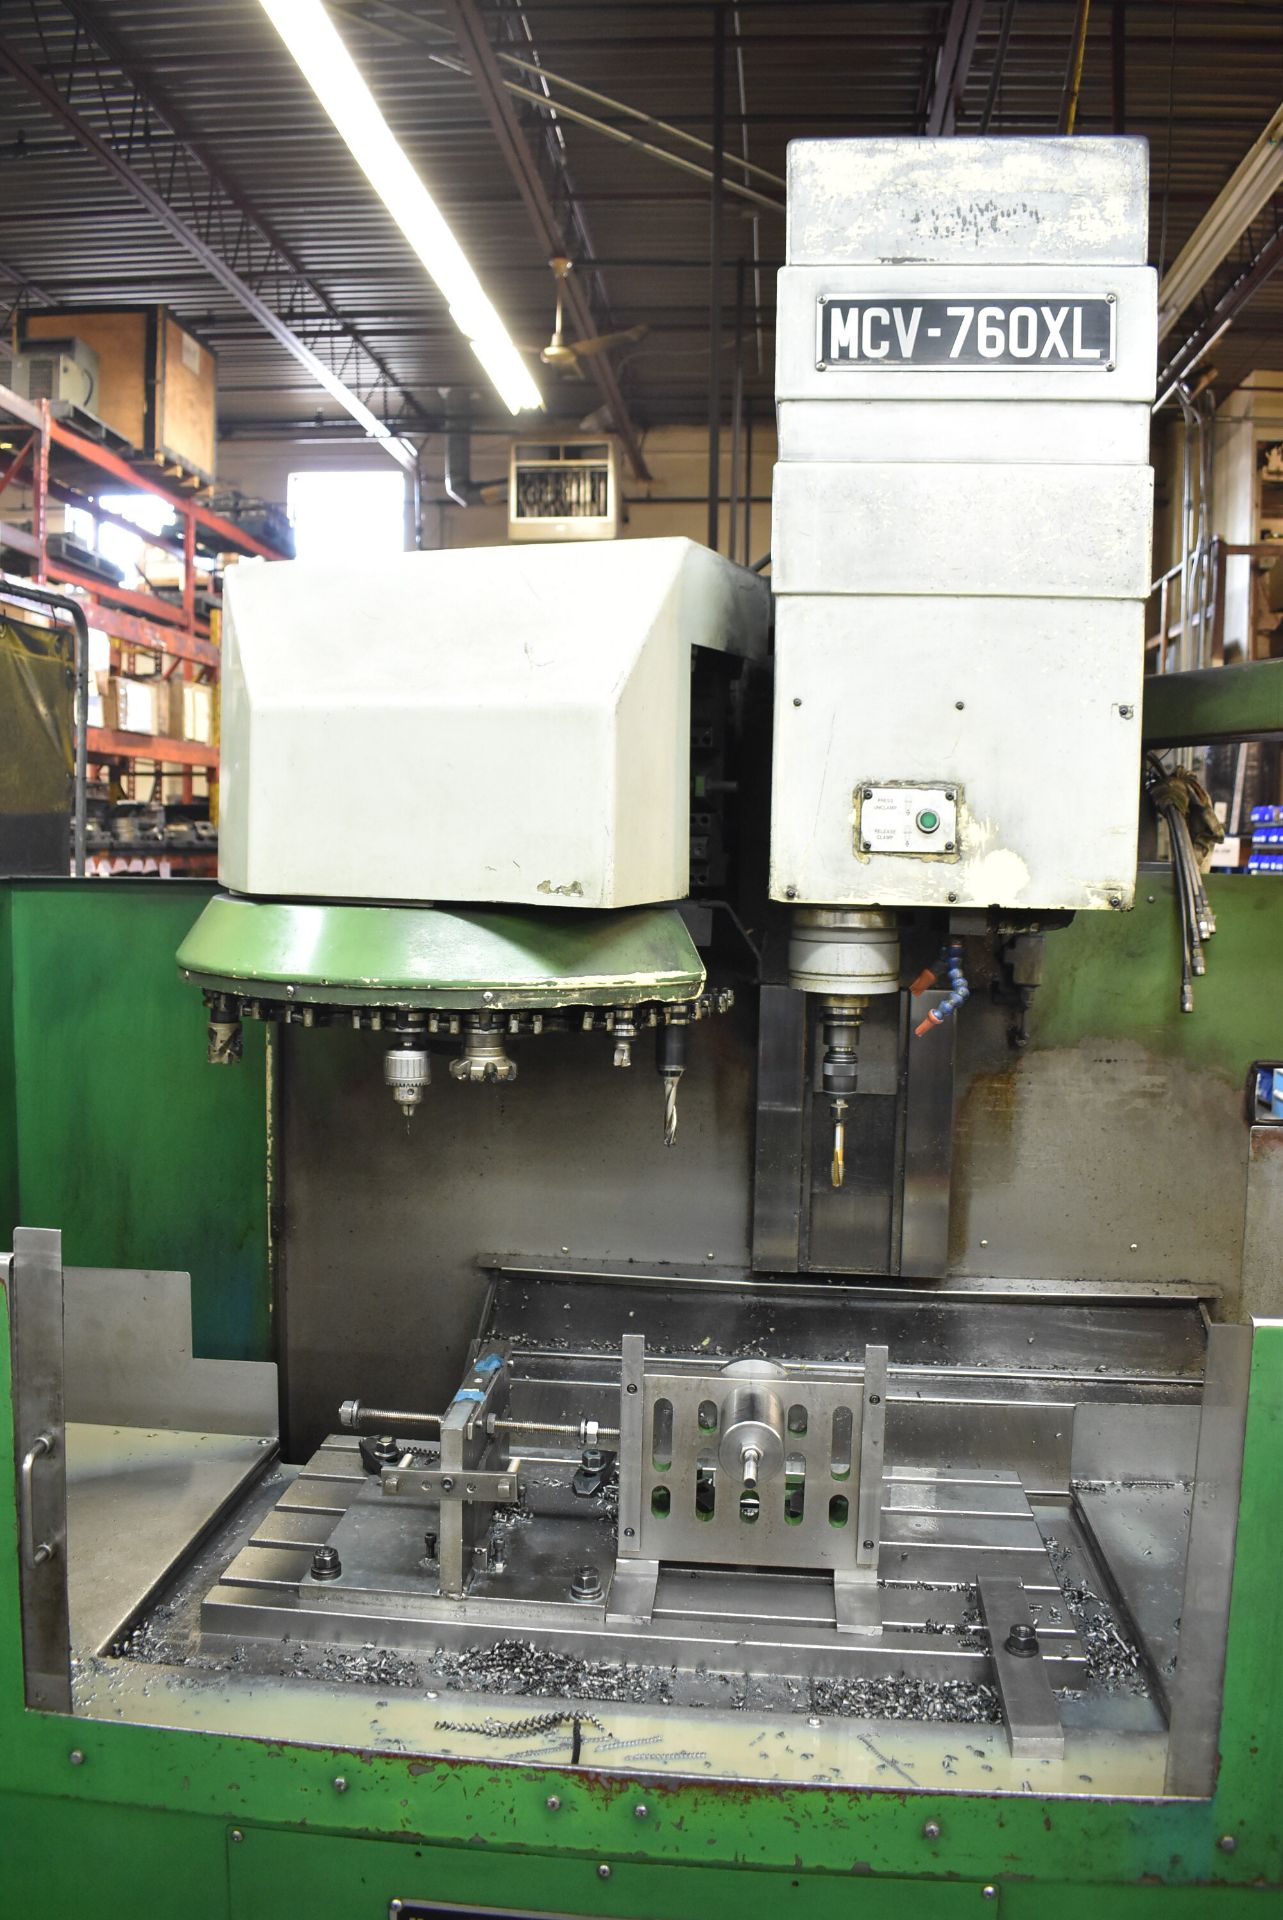 LEADWELL MCV-760XL CNC VERTICAL MACHINING CENTER WITH FANUC OM CNC CONTROL, 19.5" X 39" T-SLOT - Image 3 of 6